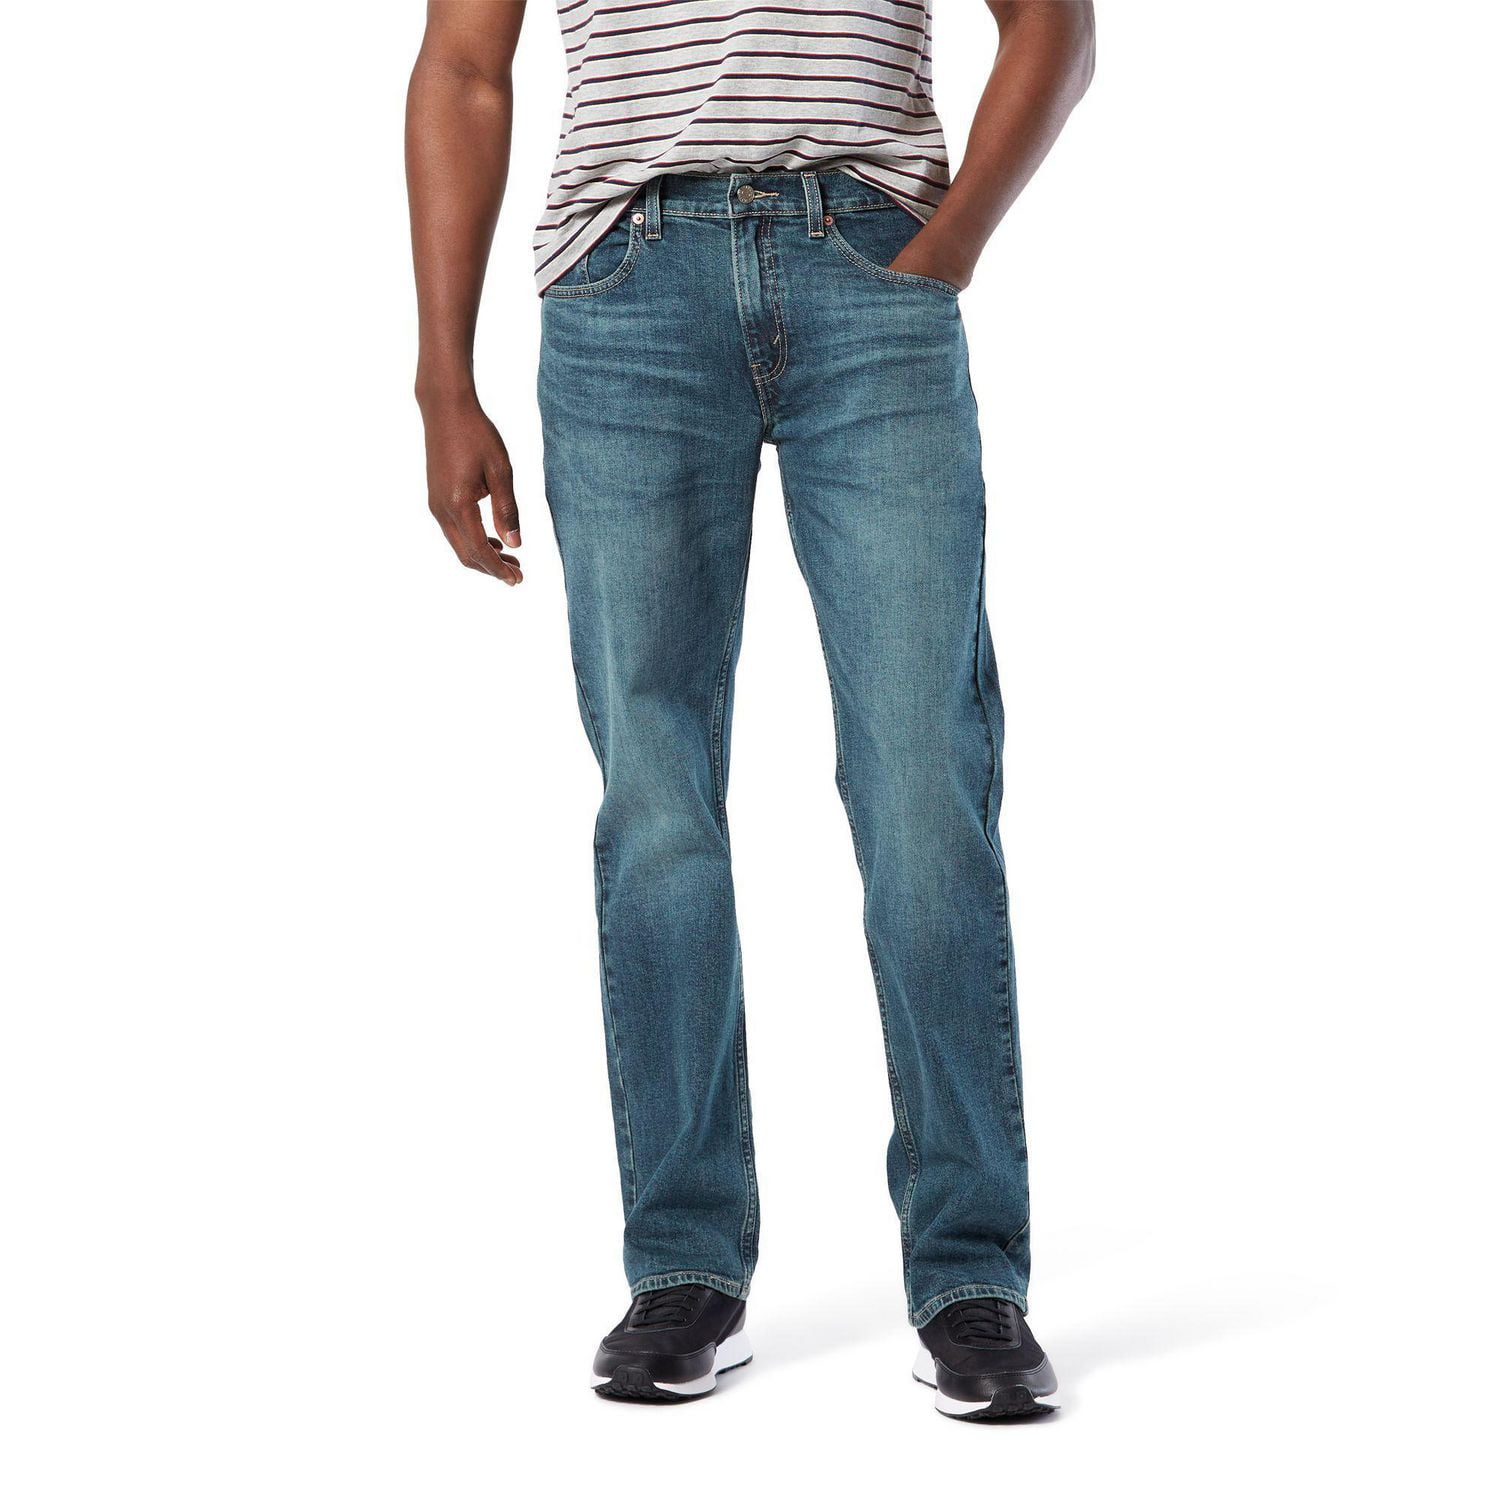 Signature by Levi Strauss & Co. Boys' Slim Fit Carpenter Jeans